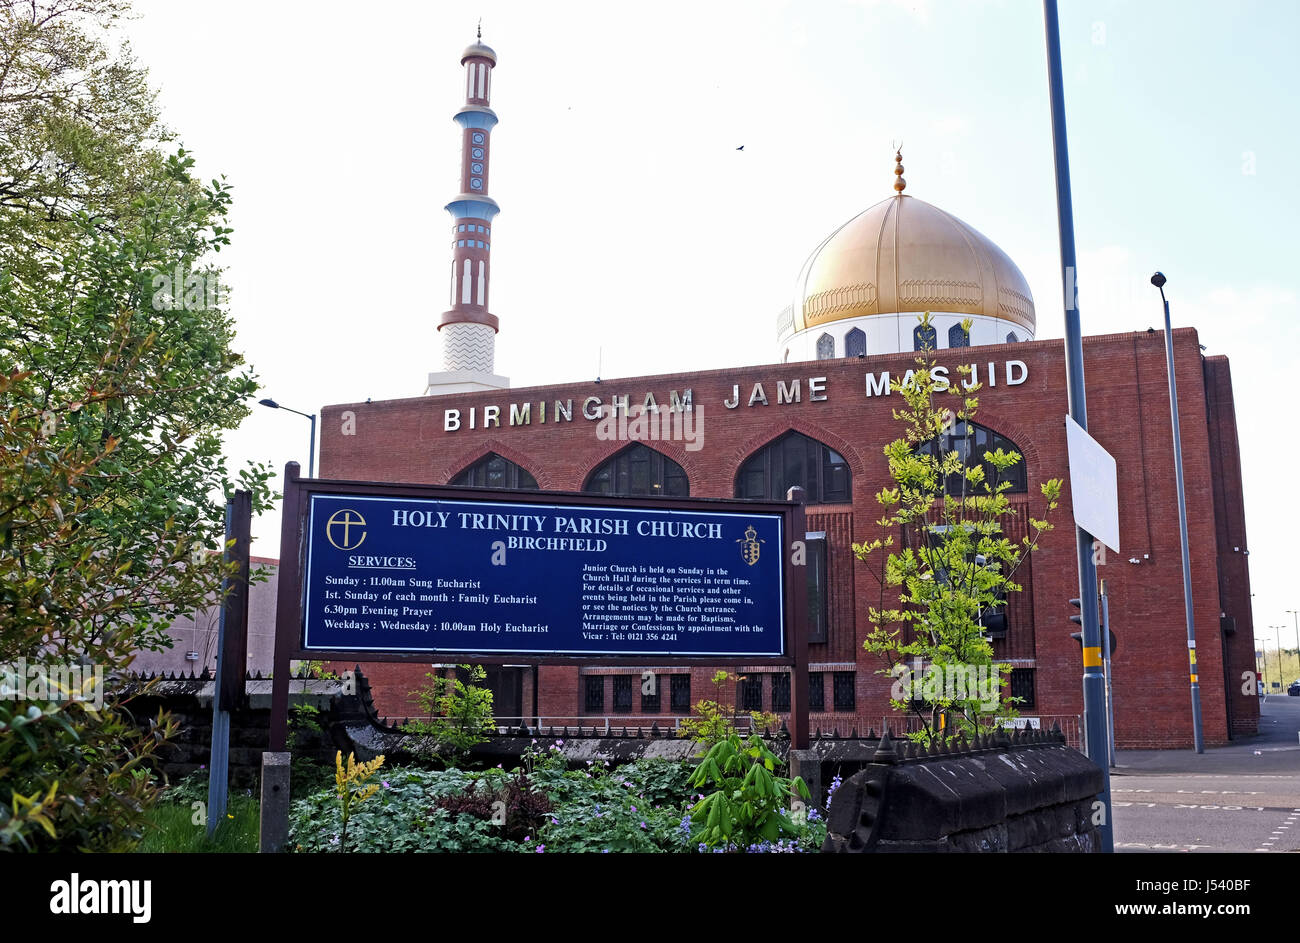 The Birmingham Jame Masjid mosque next door to the Holy Trinity Parish Church of Birchfield  in the Aston area of the city Midlands UK Photograph take Stock Photo